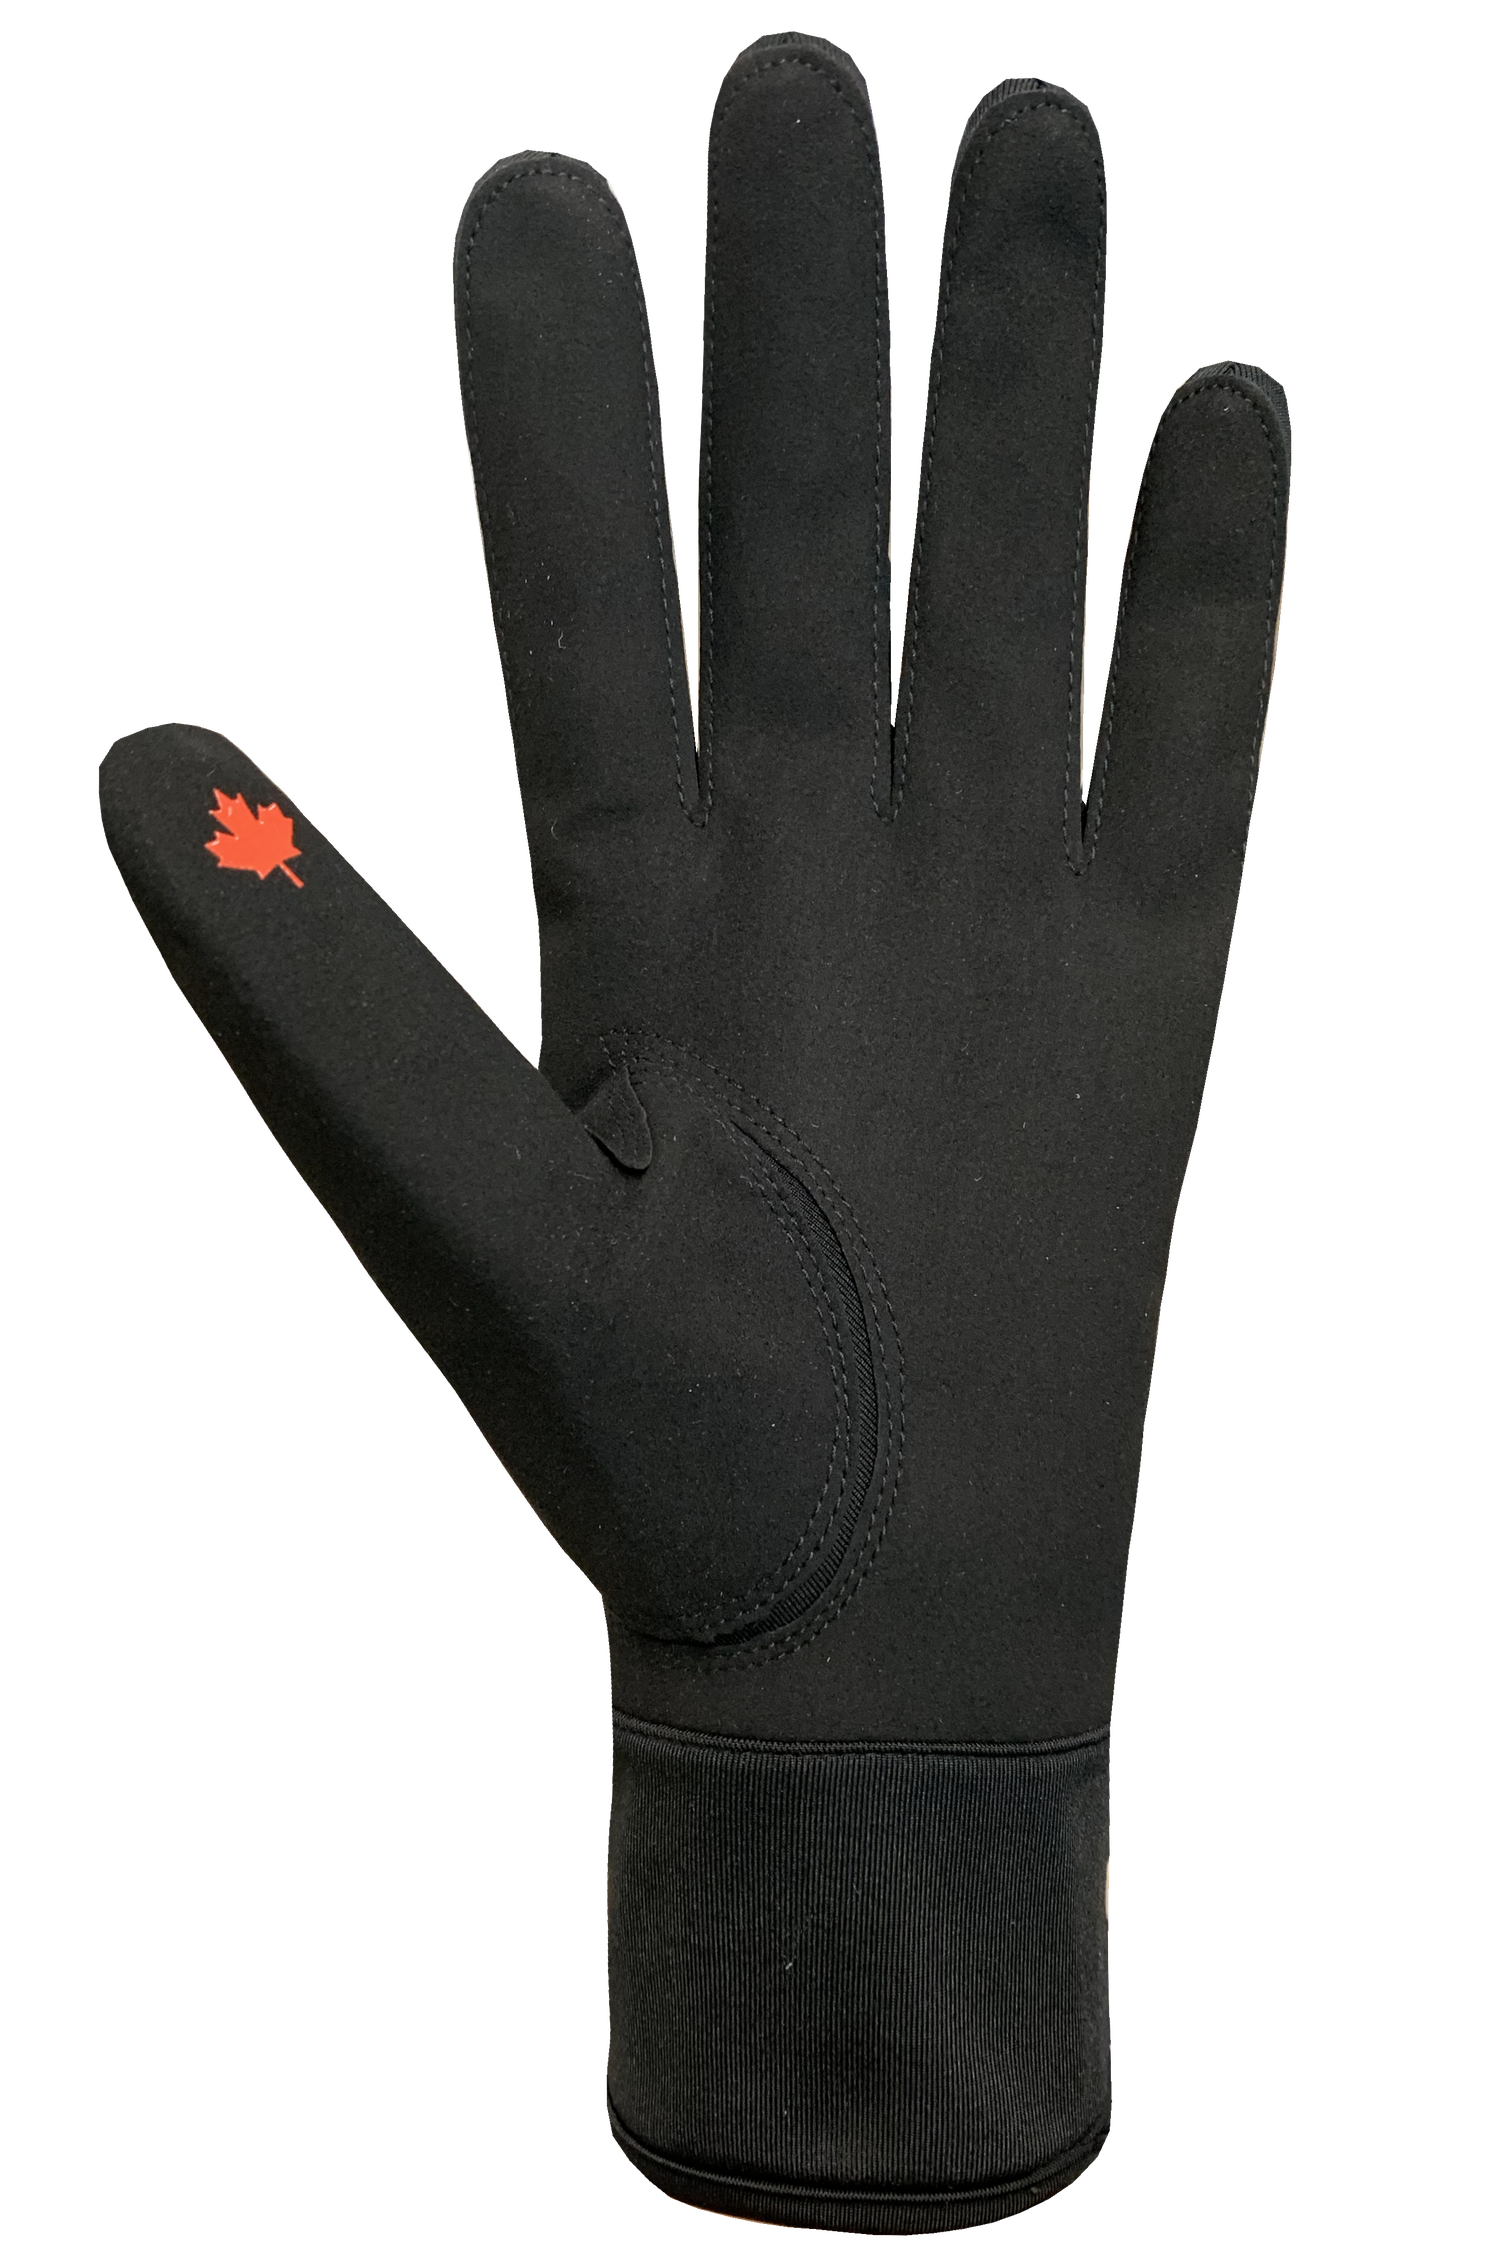 Nordiq Canada Race Gloves - Adult, Black/Red